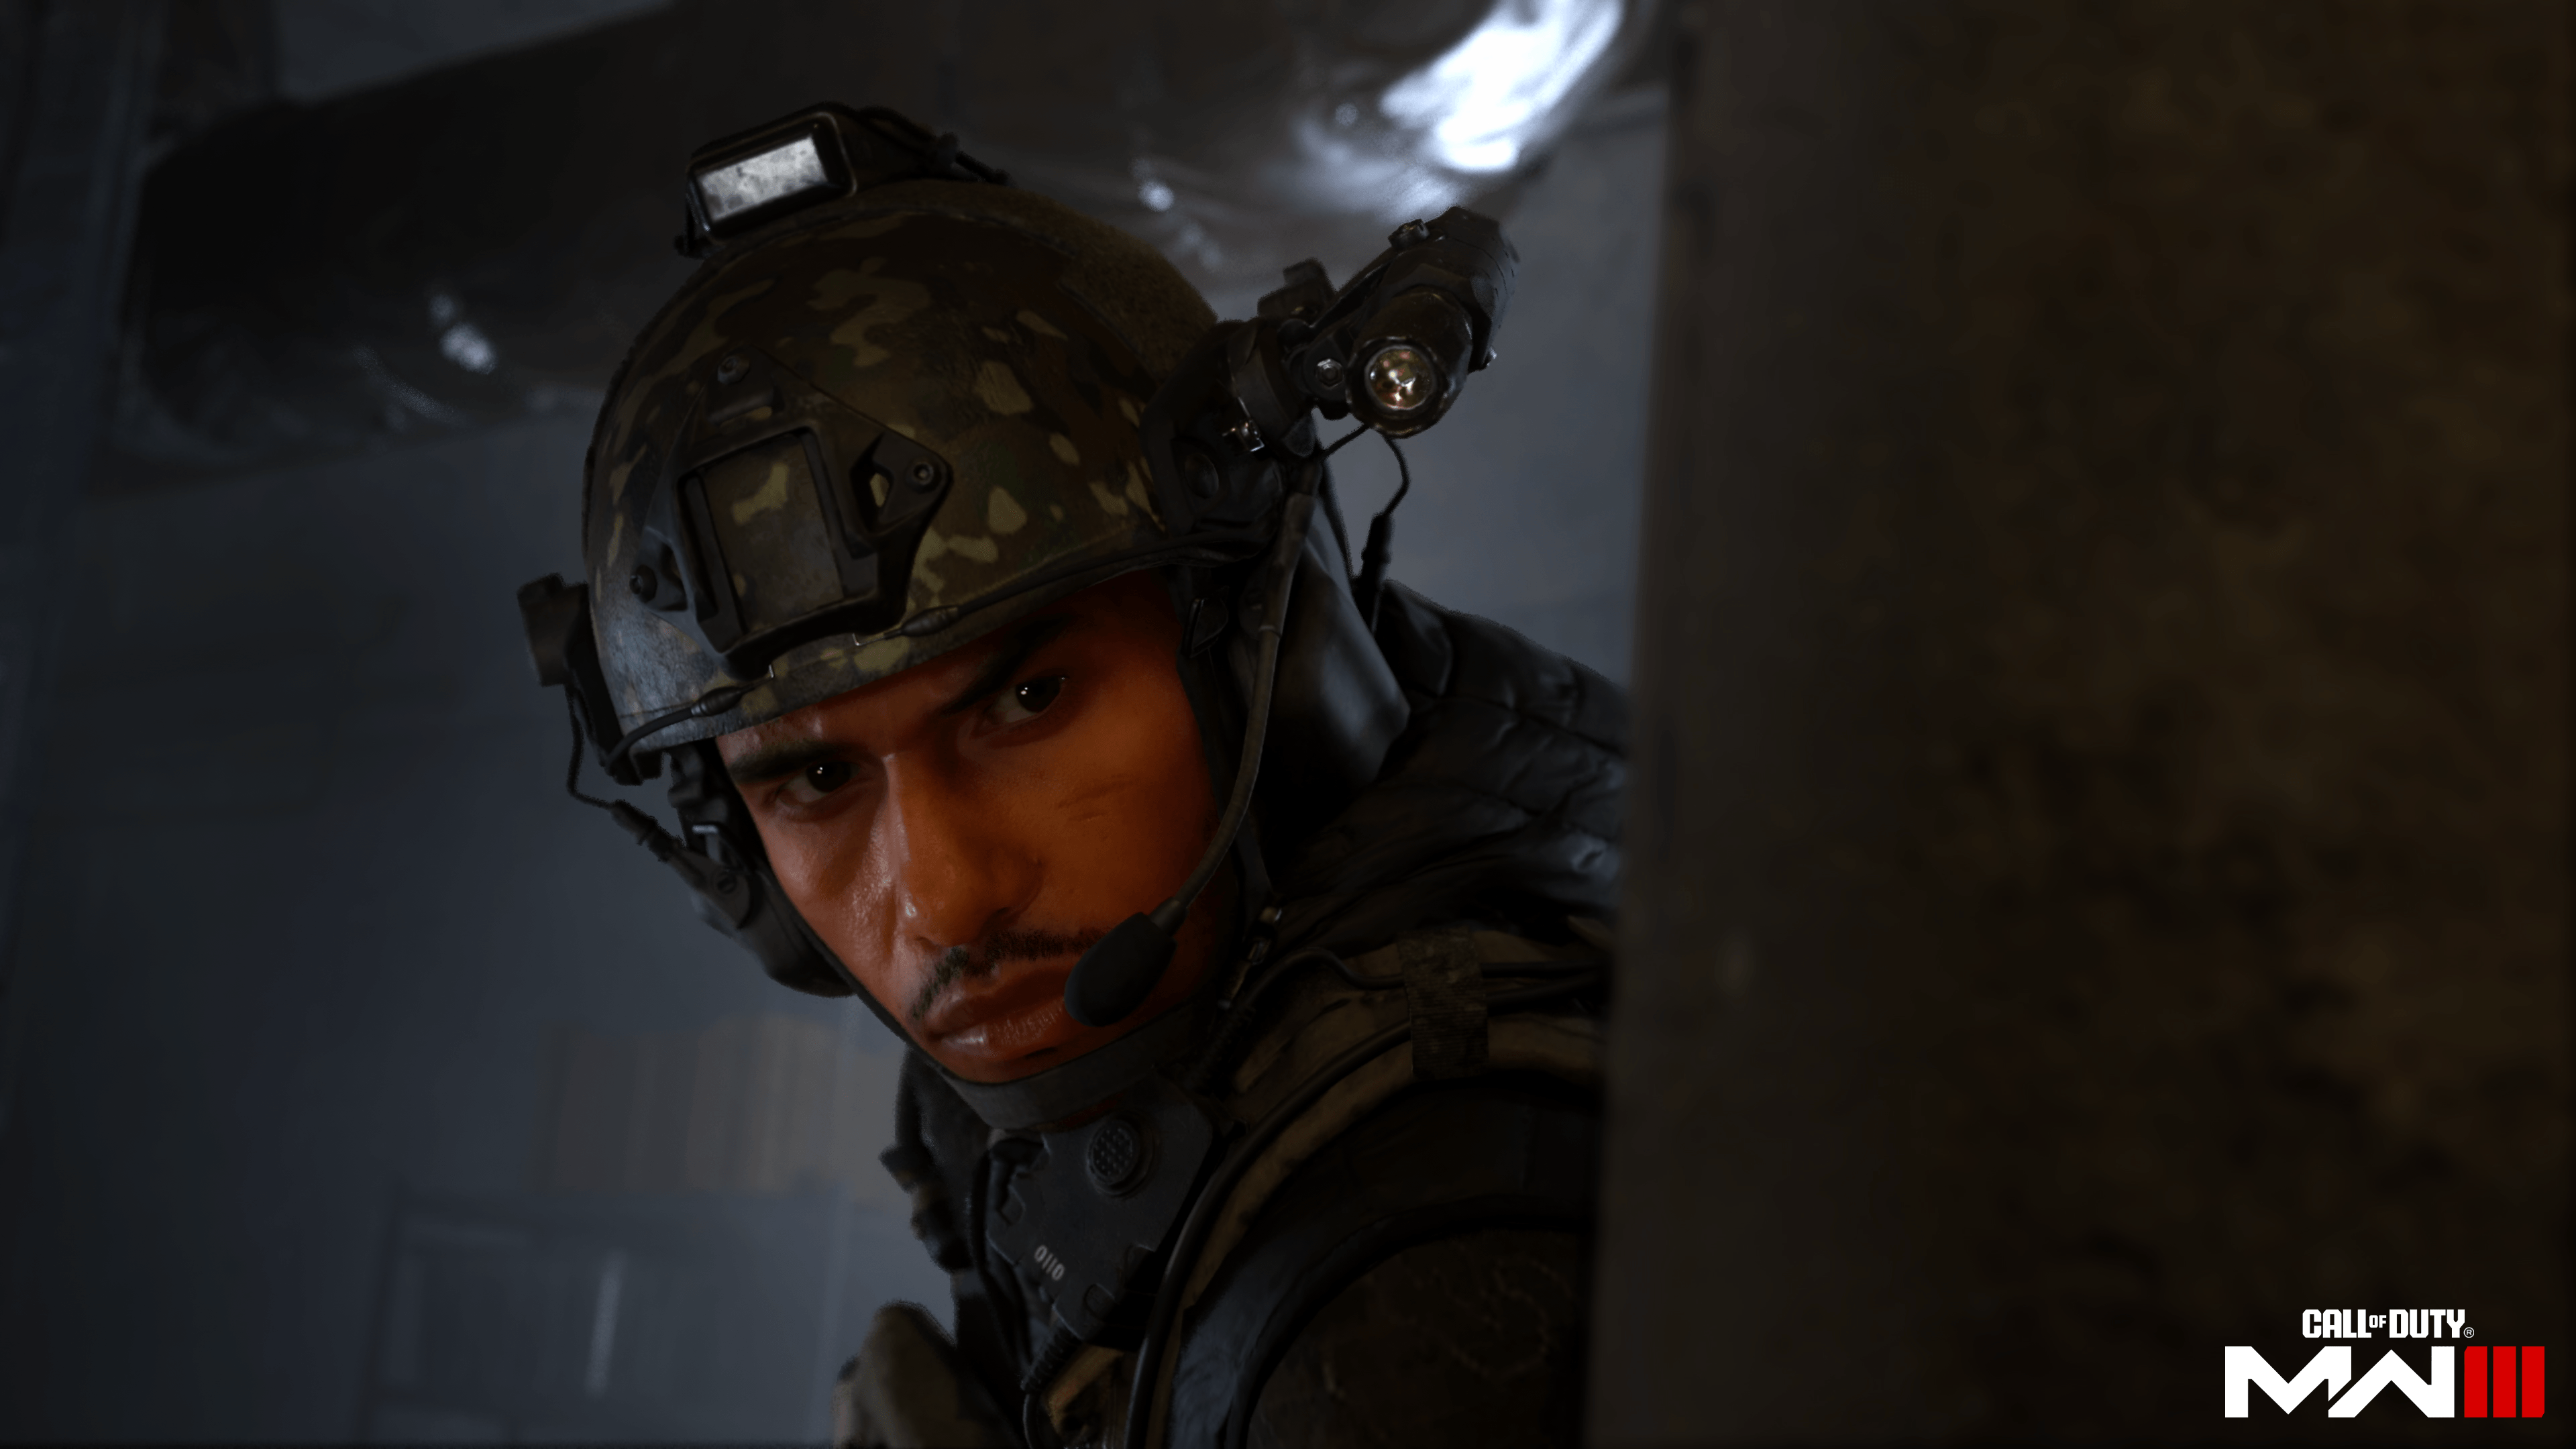 Activision reveals gameplay trailer for Call of Duty Modern